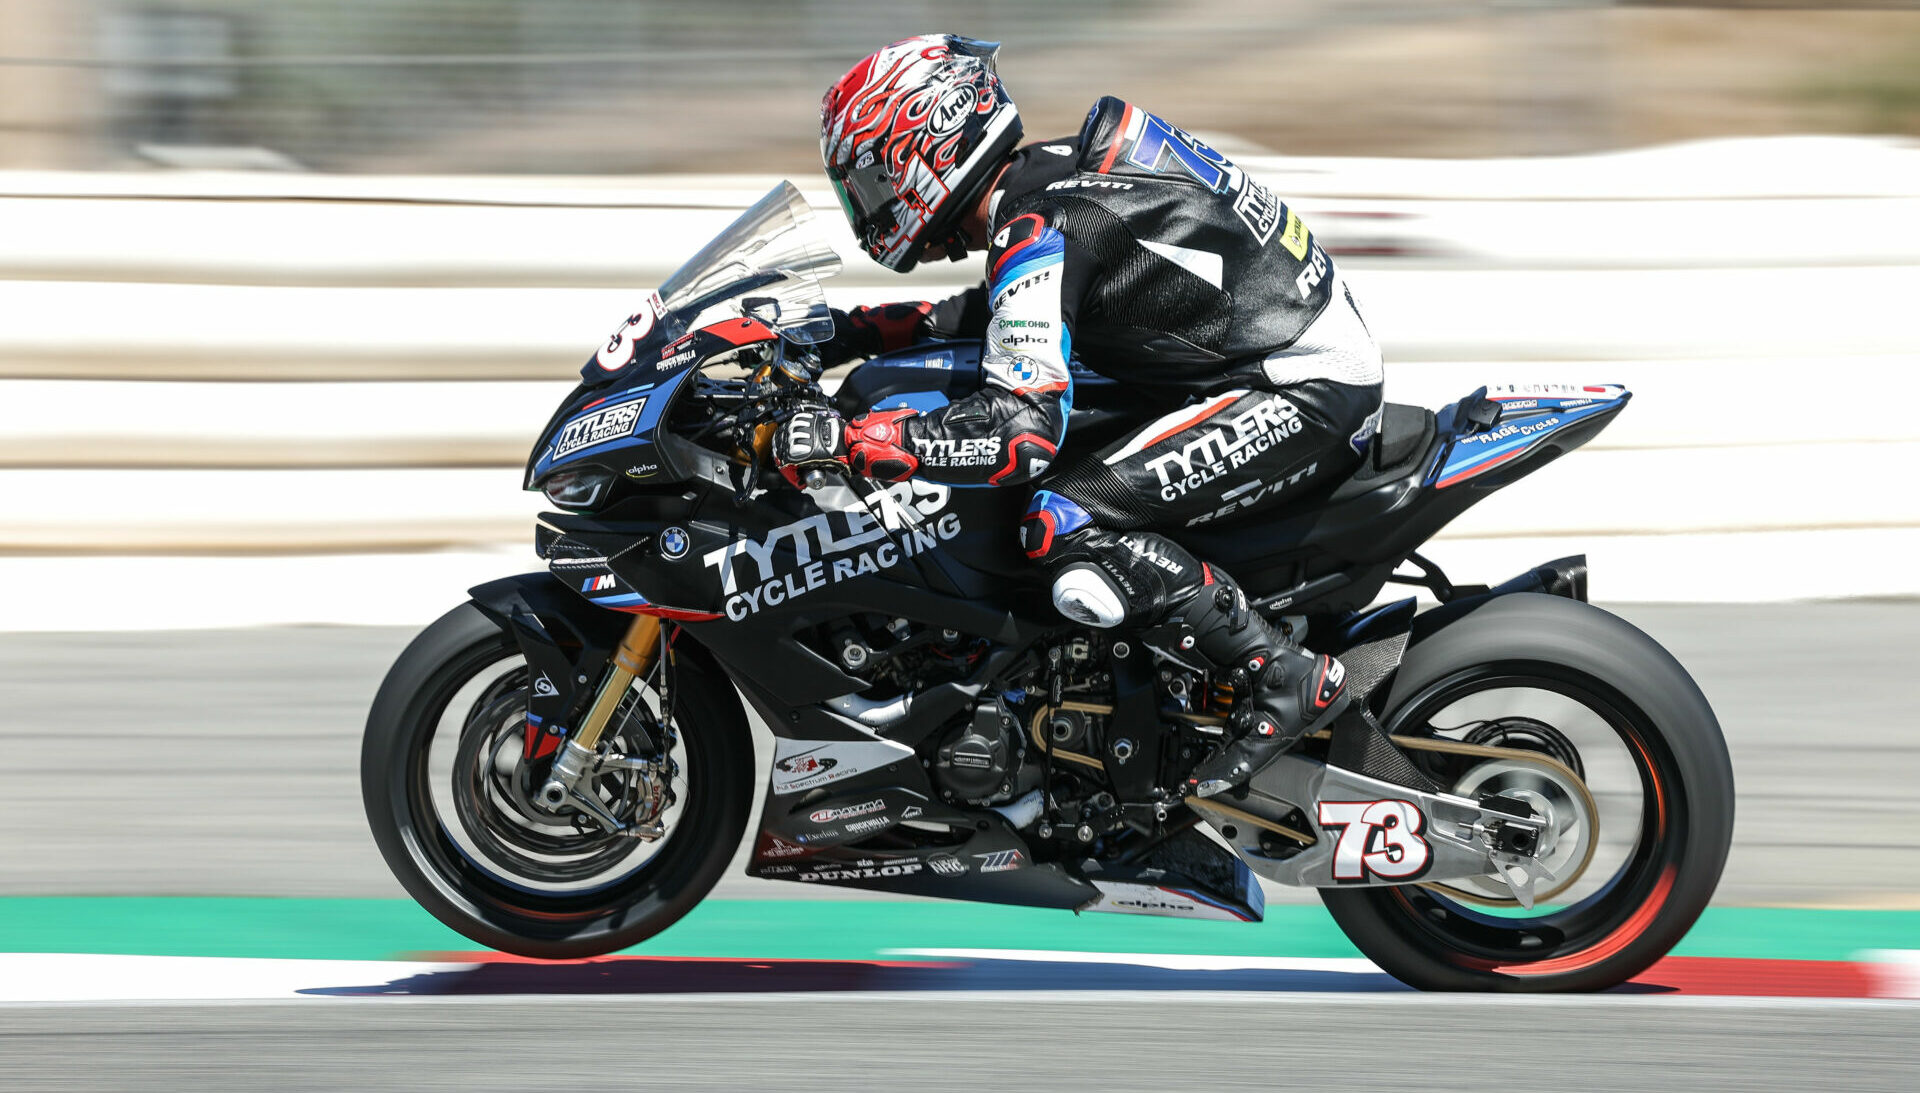 Larry Pegram (73) competed on a Tytlers Cycle Racing BMW M 1000 RR as a wild card at Laguna Seca. Photo by Brian J. Nelson, courtesy Tytlers Cycle Racing.